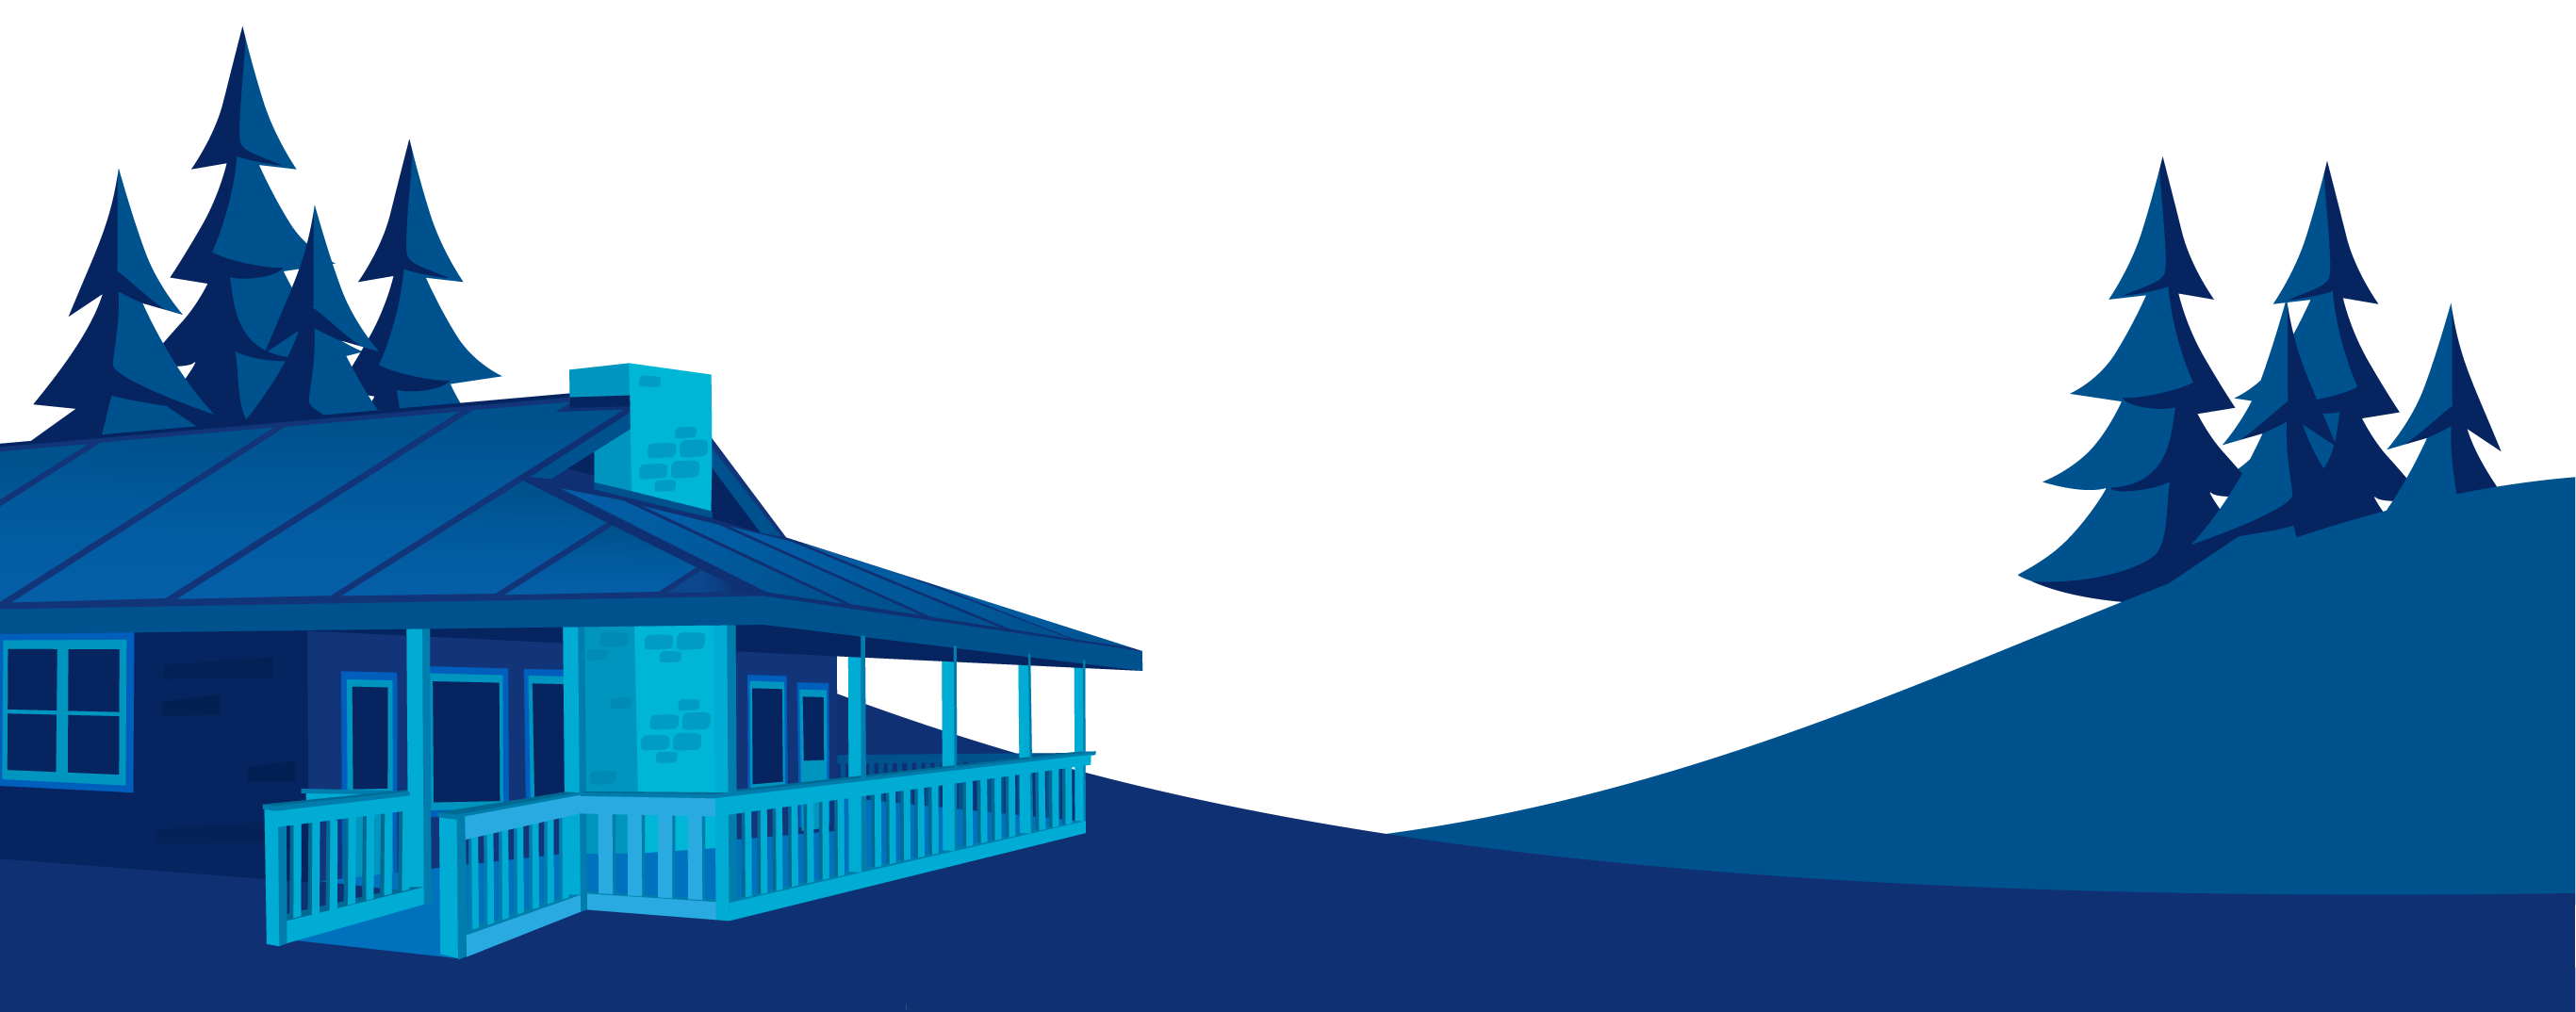 Illustration of the Lodge at Sherlock Springs in Blue Hues